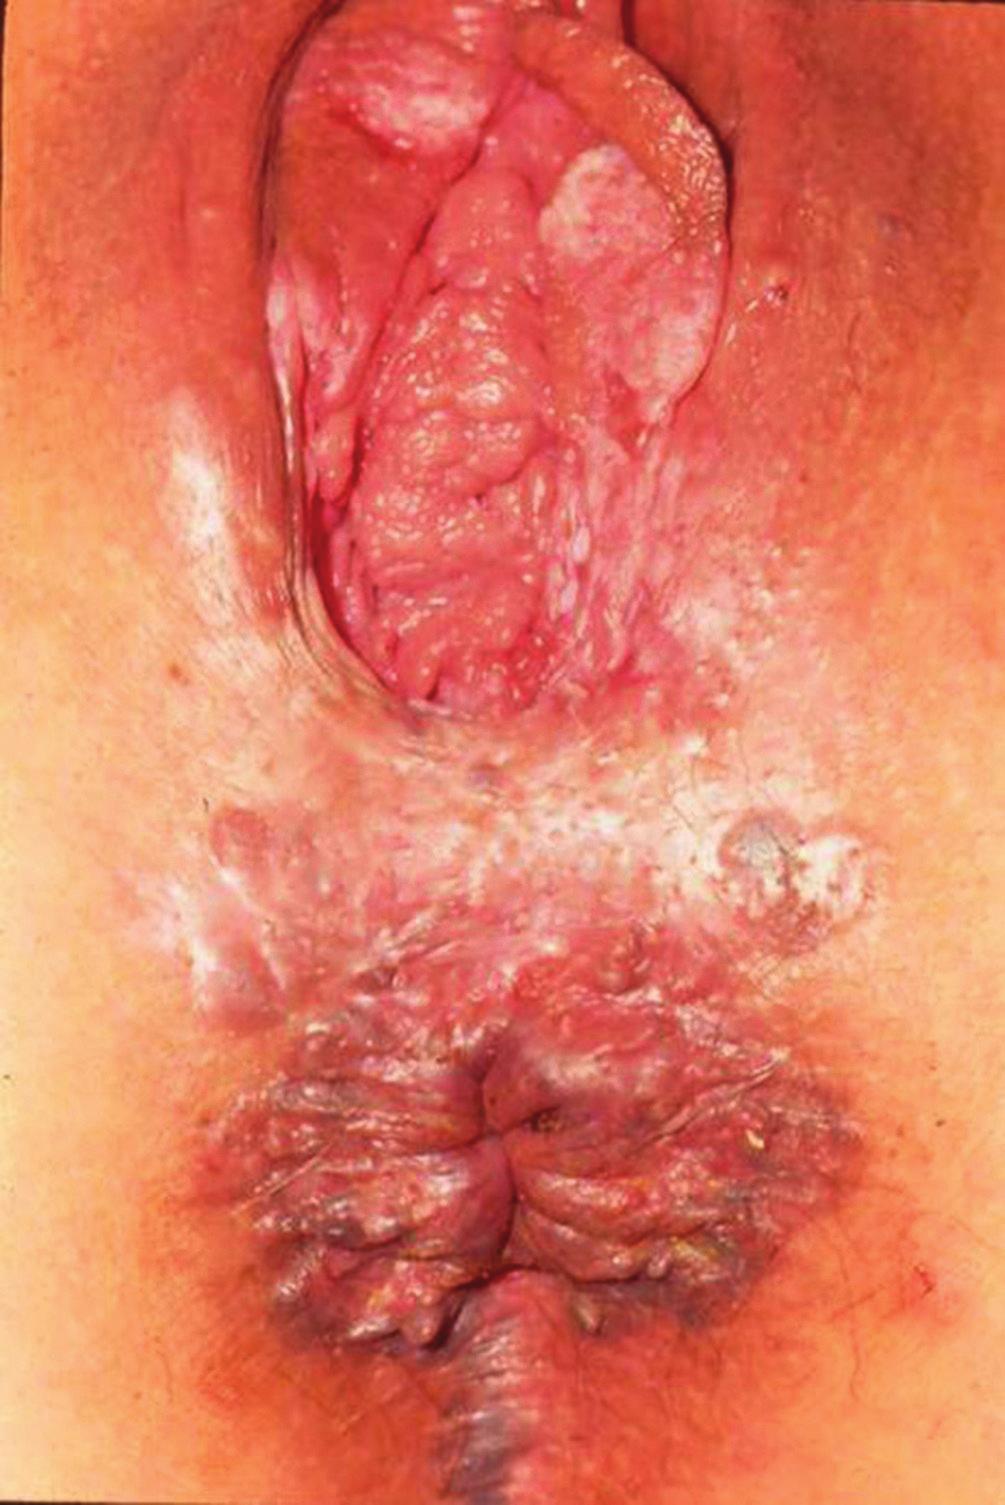 Thereby, hyper-keratotic plaques and pigmented or grayish areas must be biopsied (Figures 3 and 4).